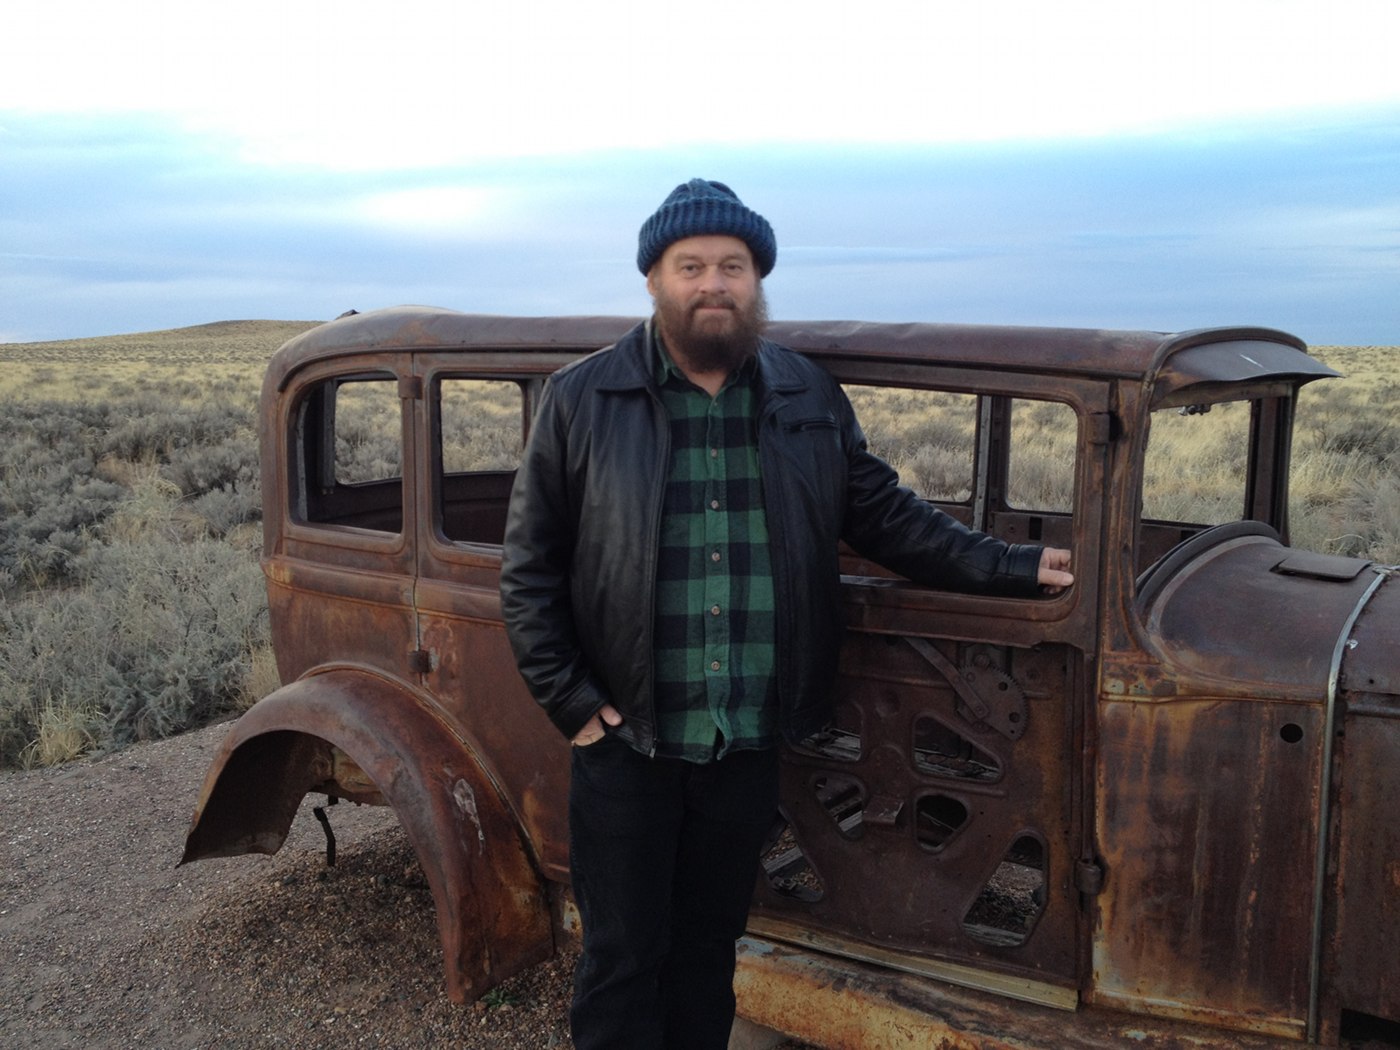 Robert W. Franson and abandoned auto - Old Route 66 Memorial, Painted Desert, Arizona - Dec 2012